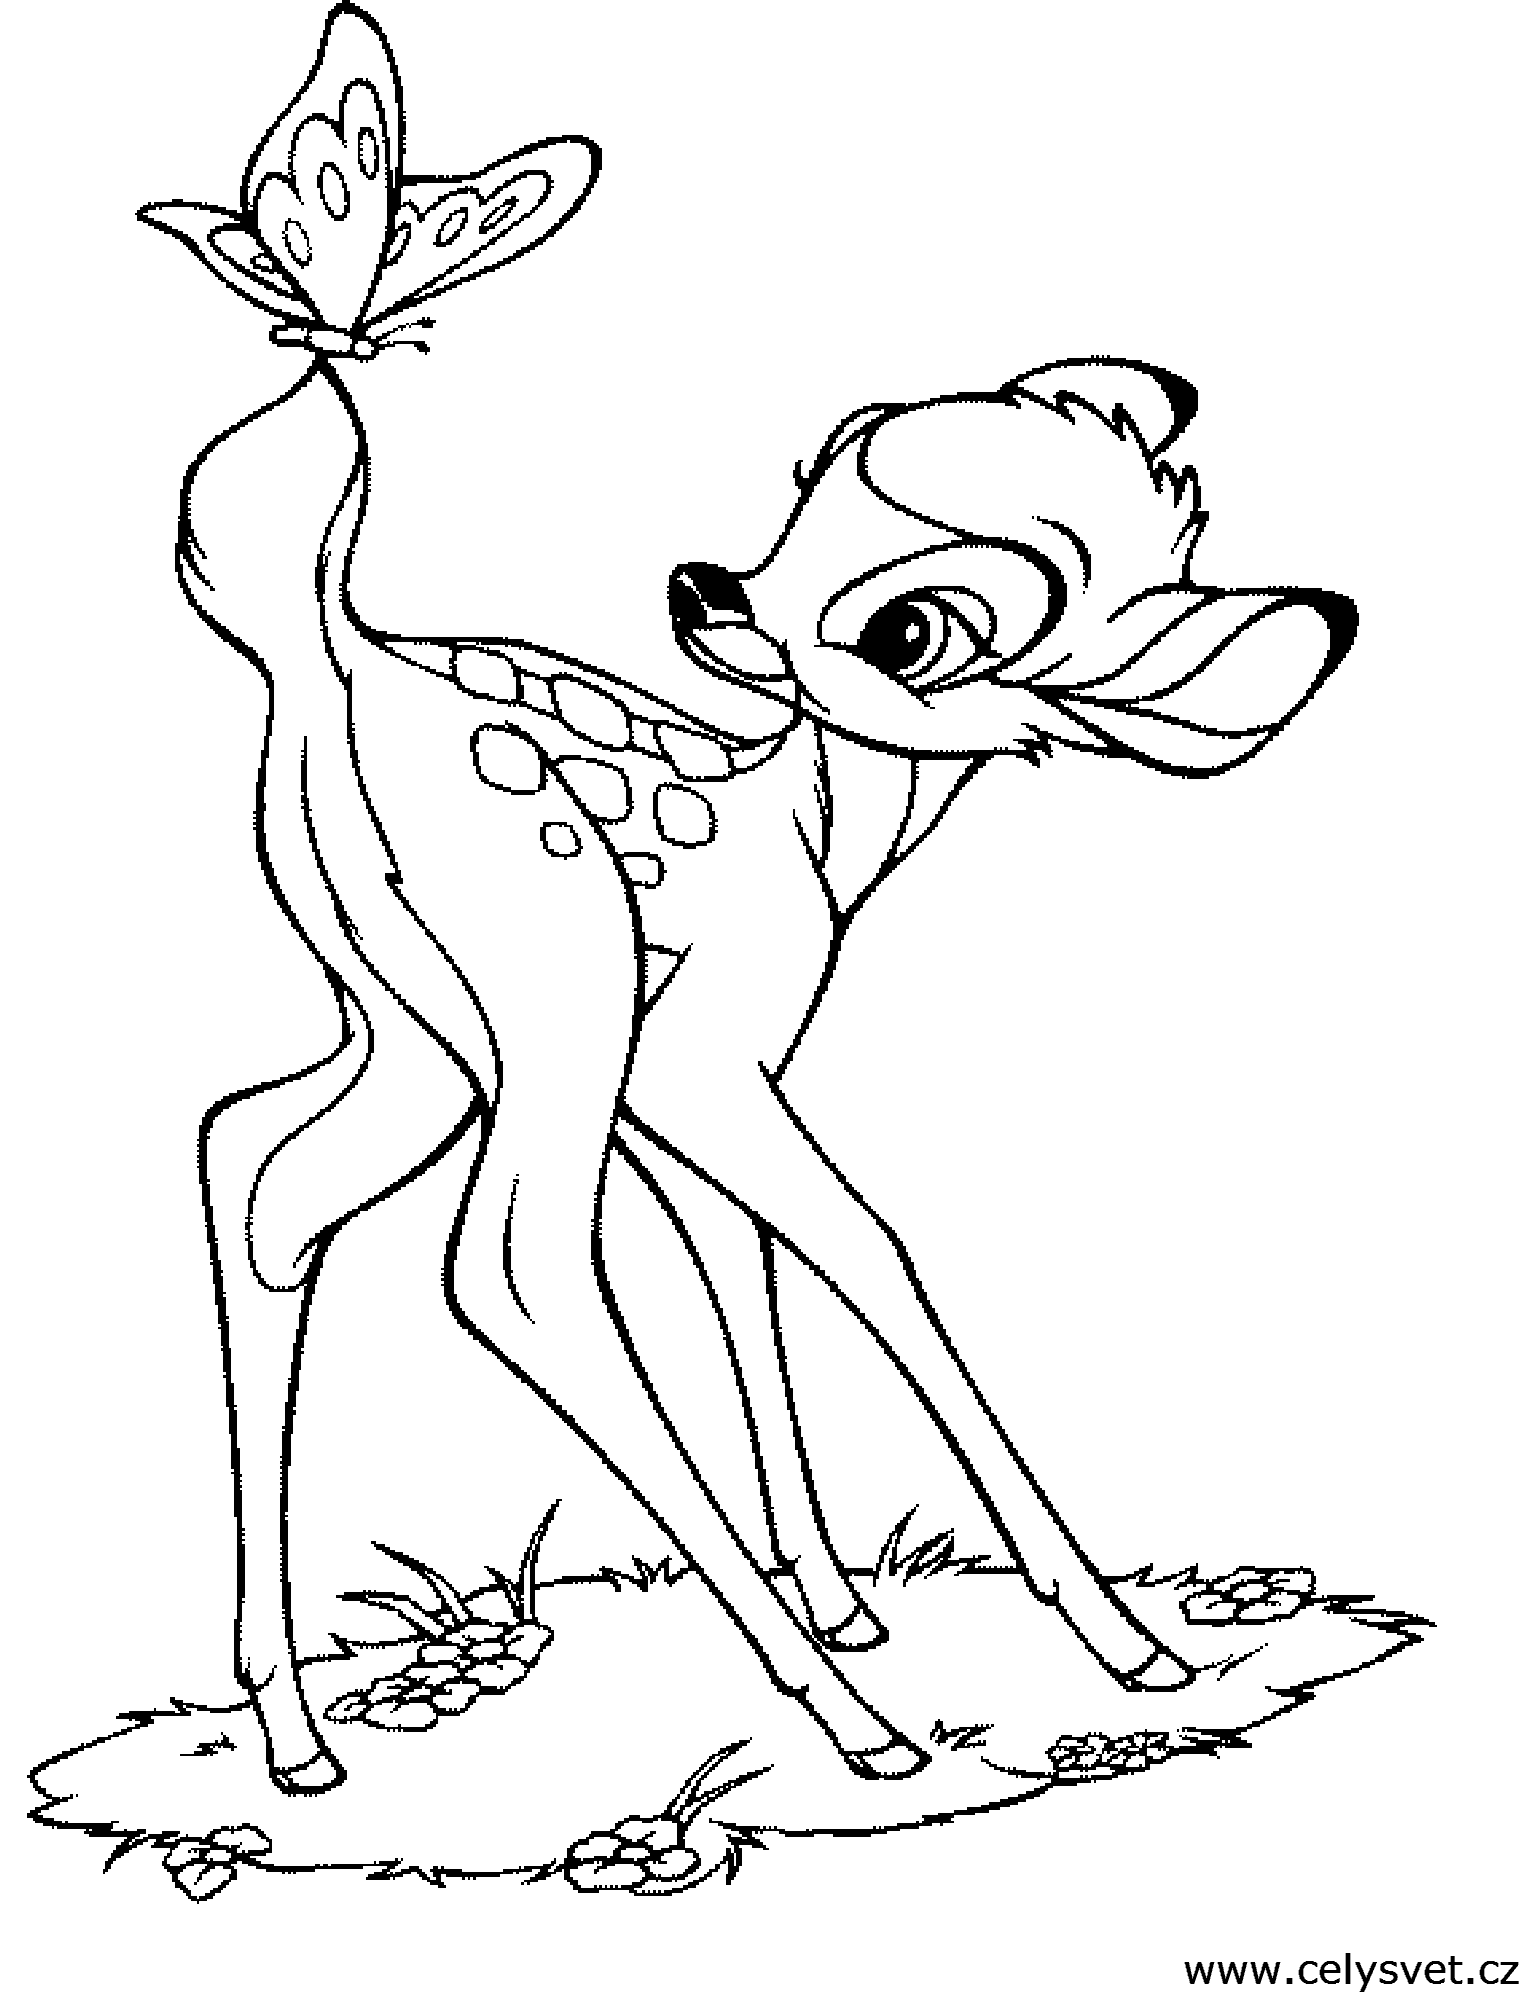 free-coloring-page-to-print